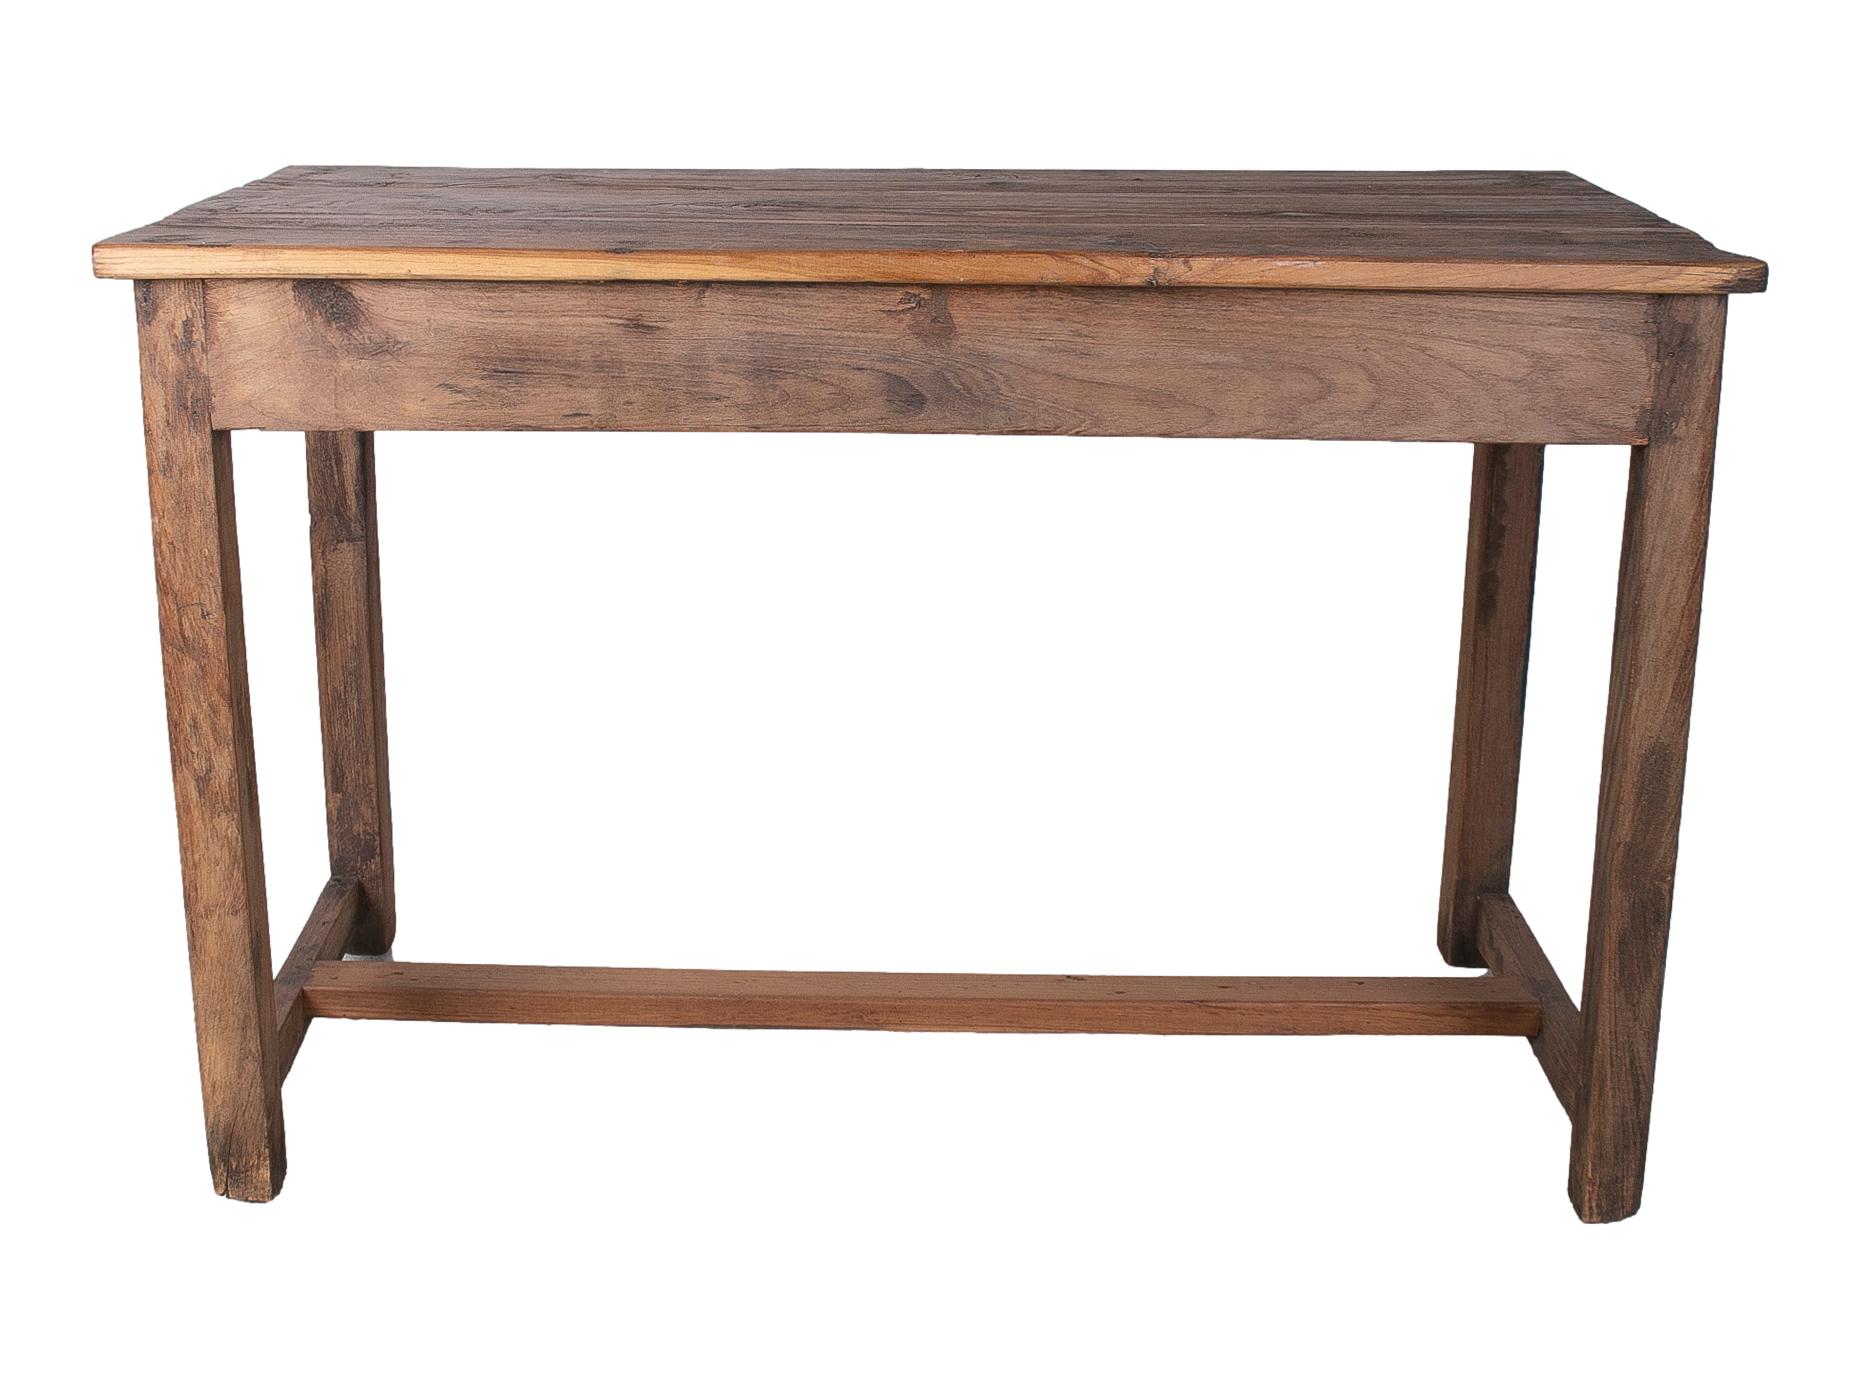 1970s Spanish industrial wooden 2-drawer table with crossbeam legs.